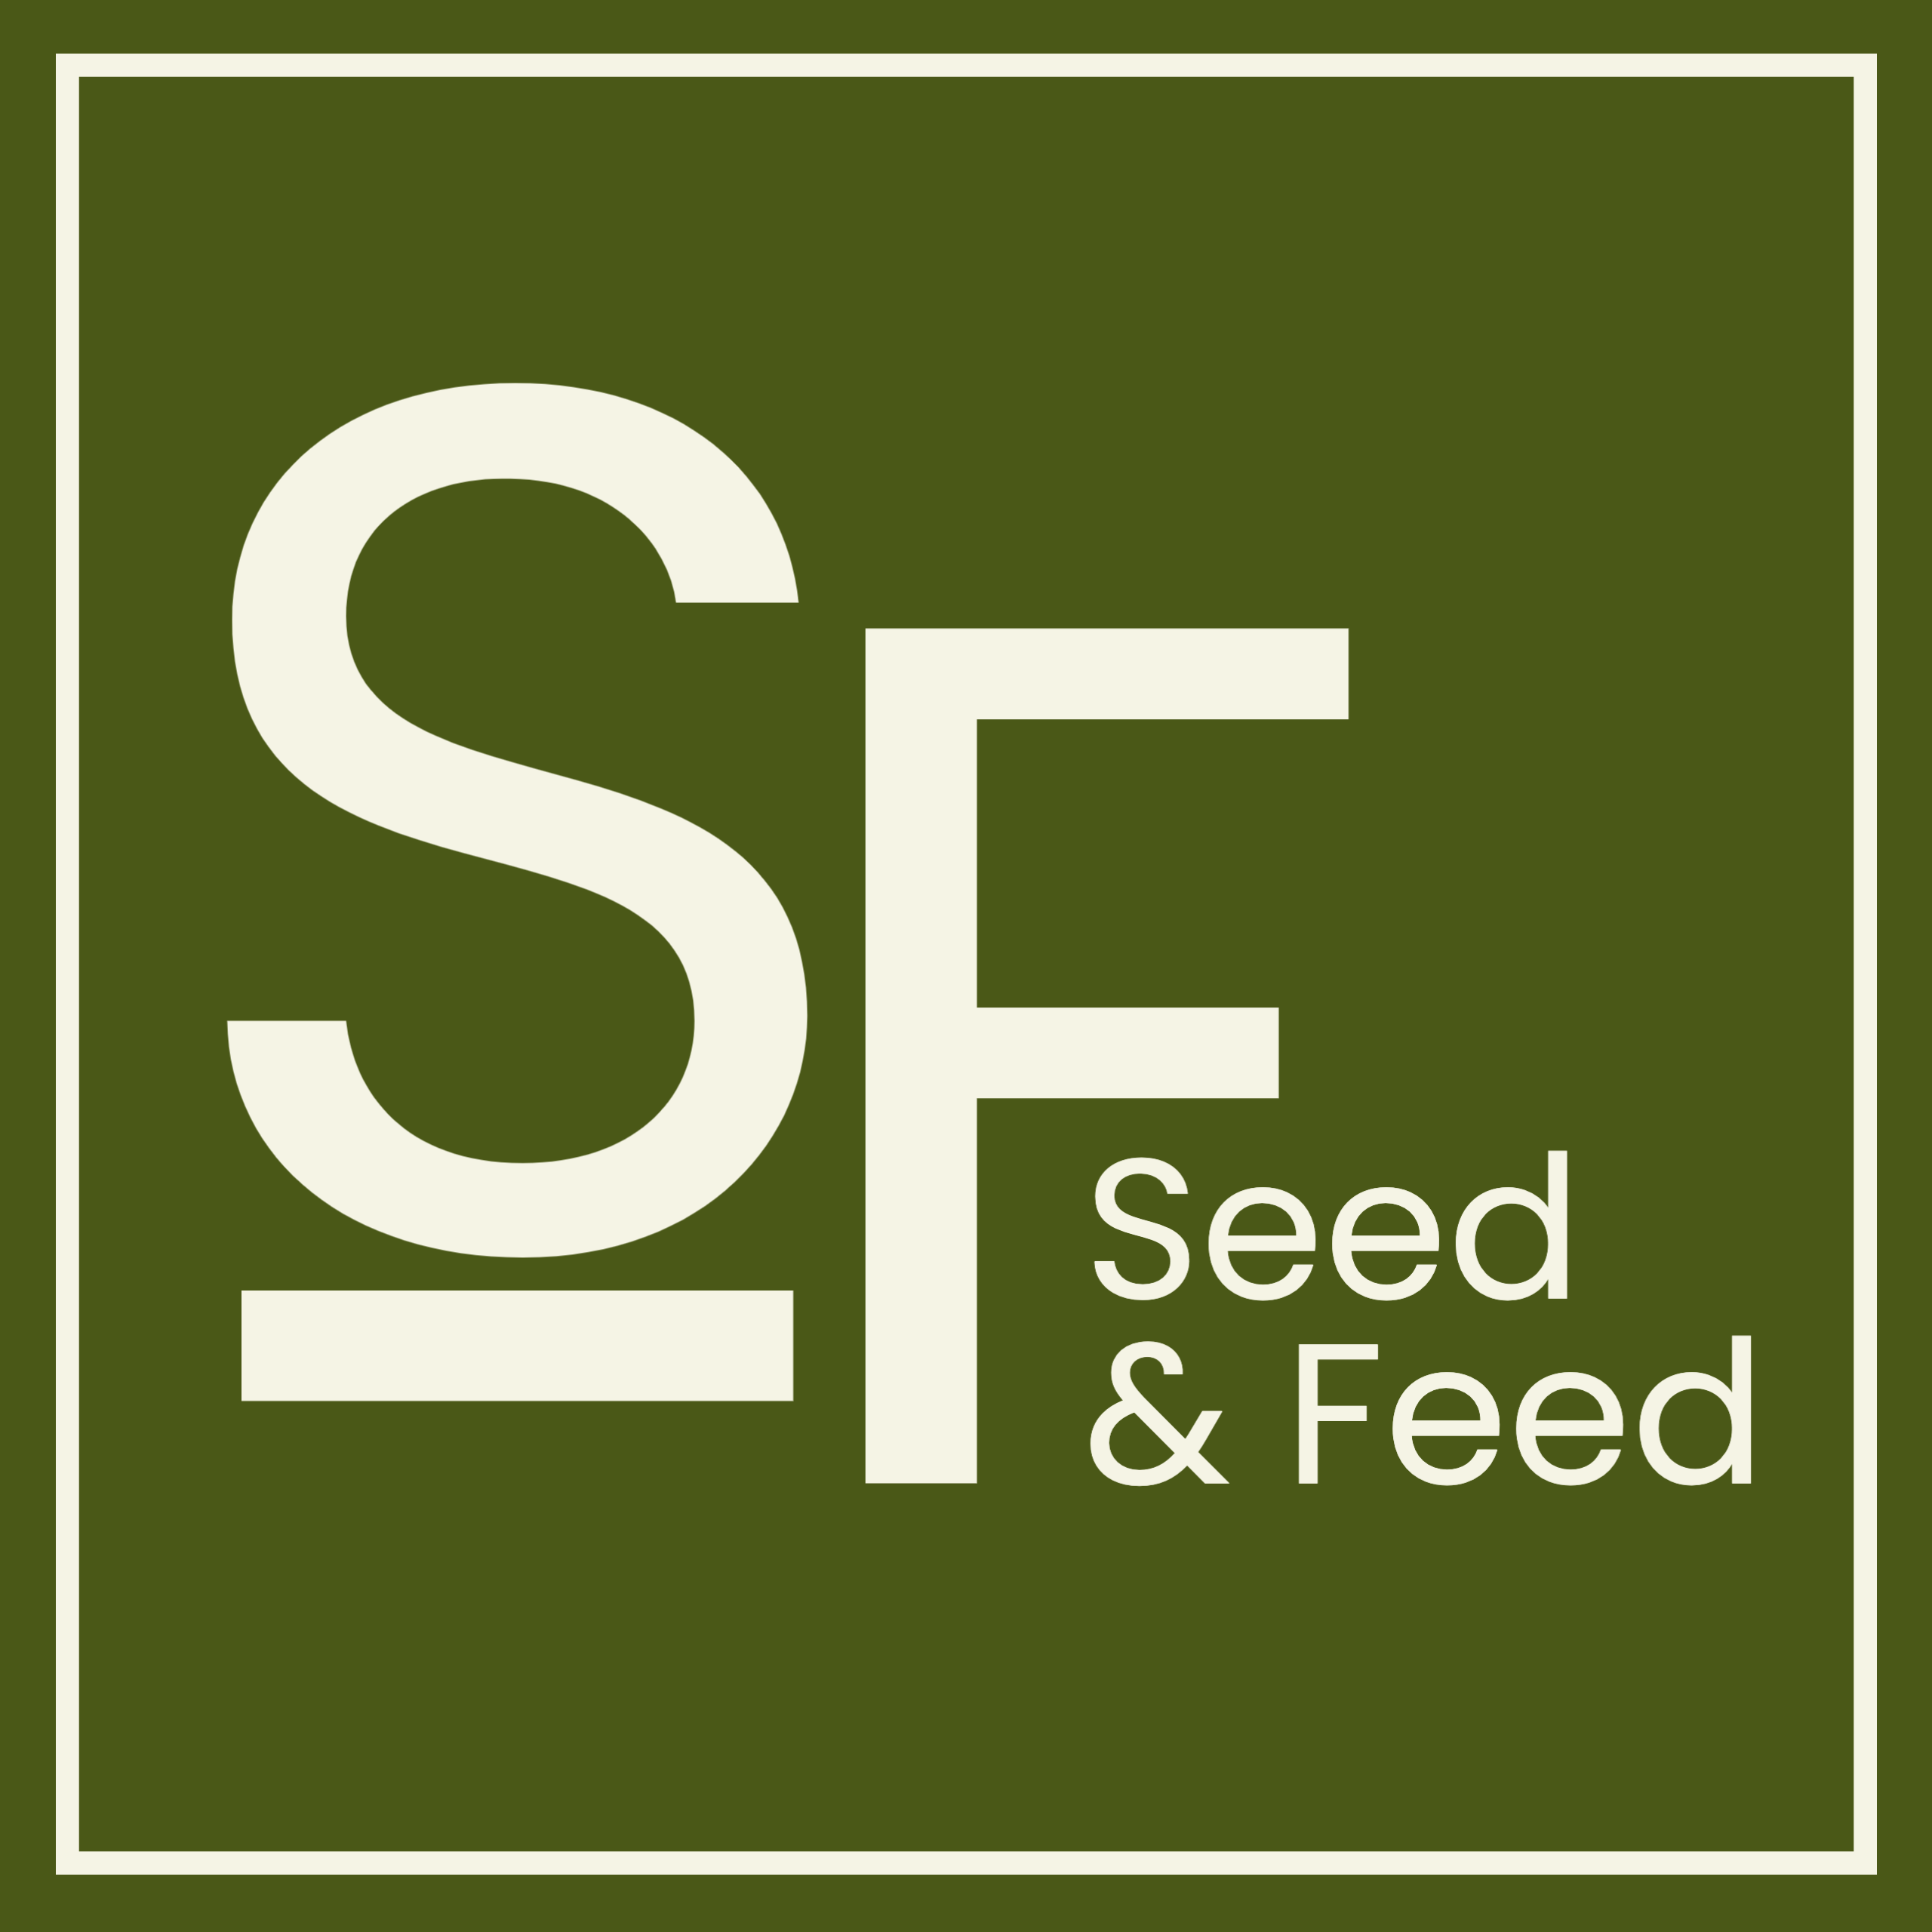 Image of the 'Feed & Seed' project